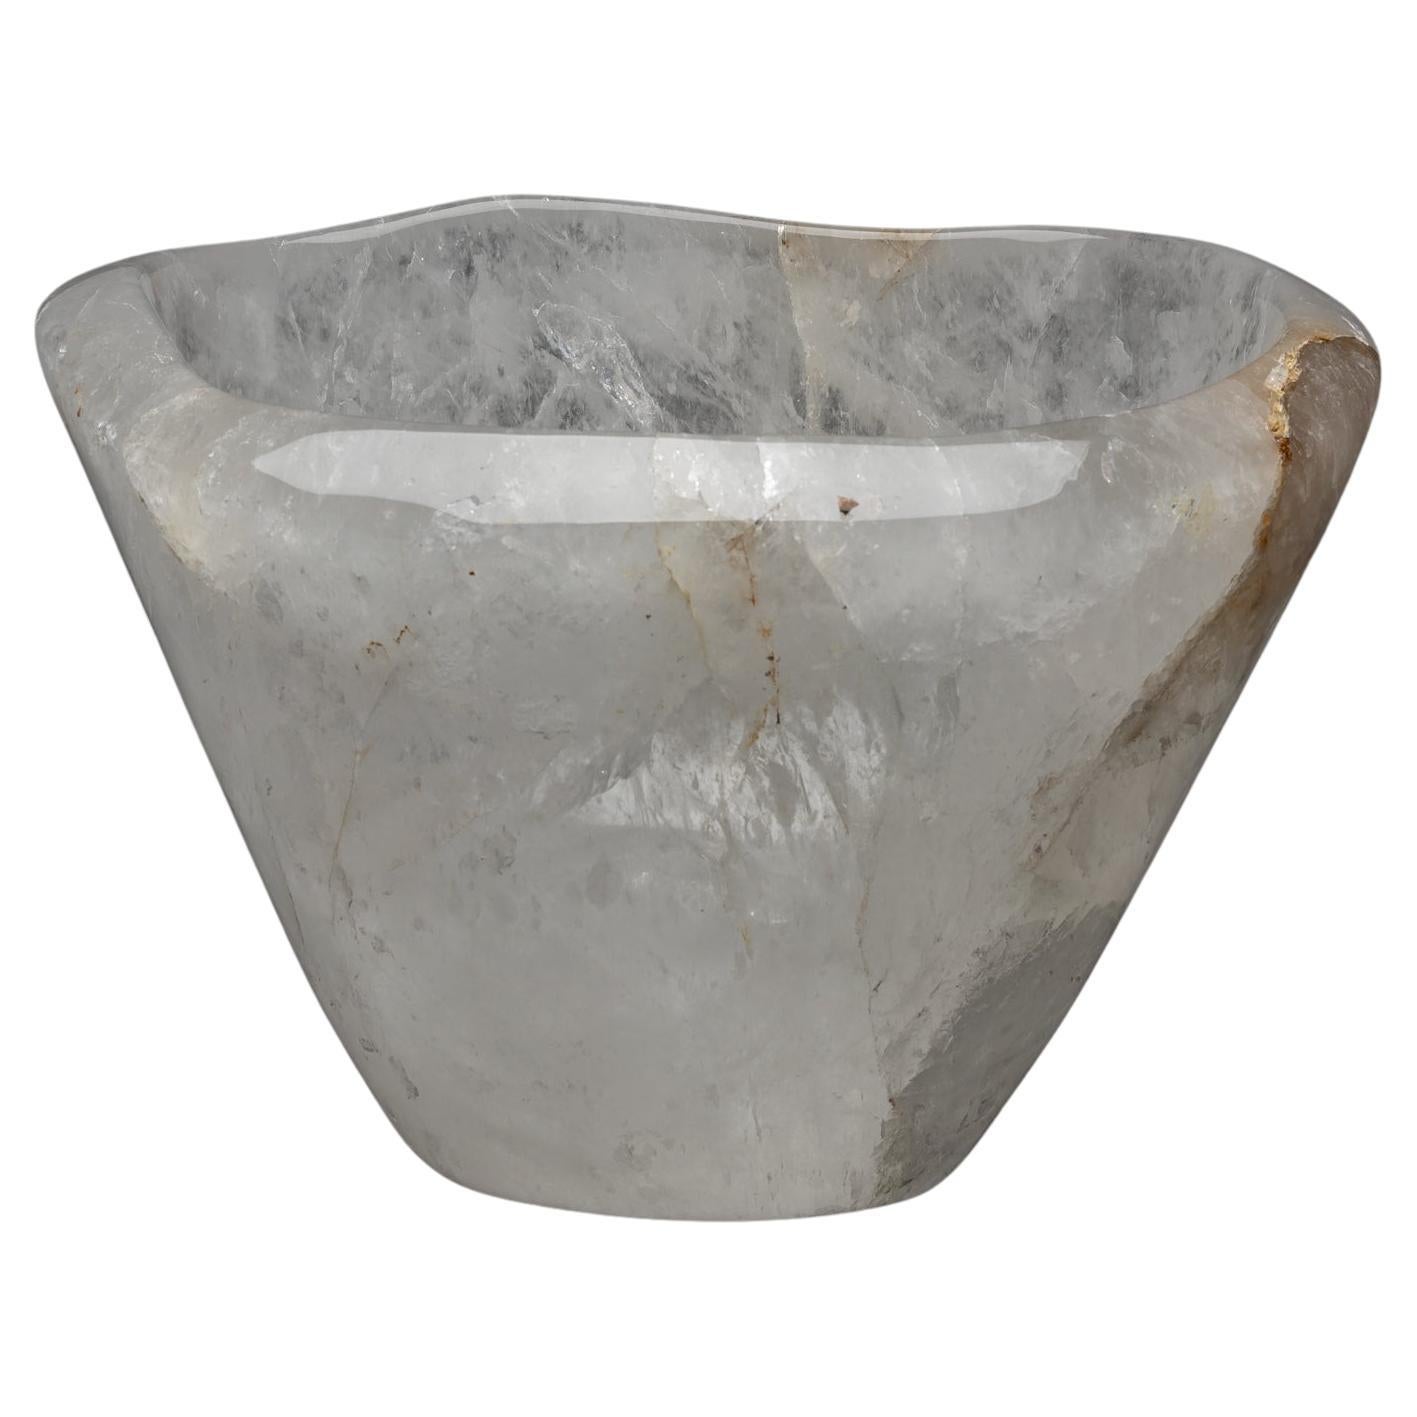 Large Quartz Bowl for Wine Cooler or Champagne from Madagascar